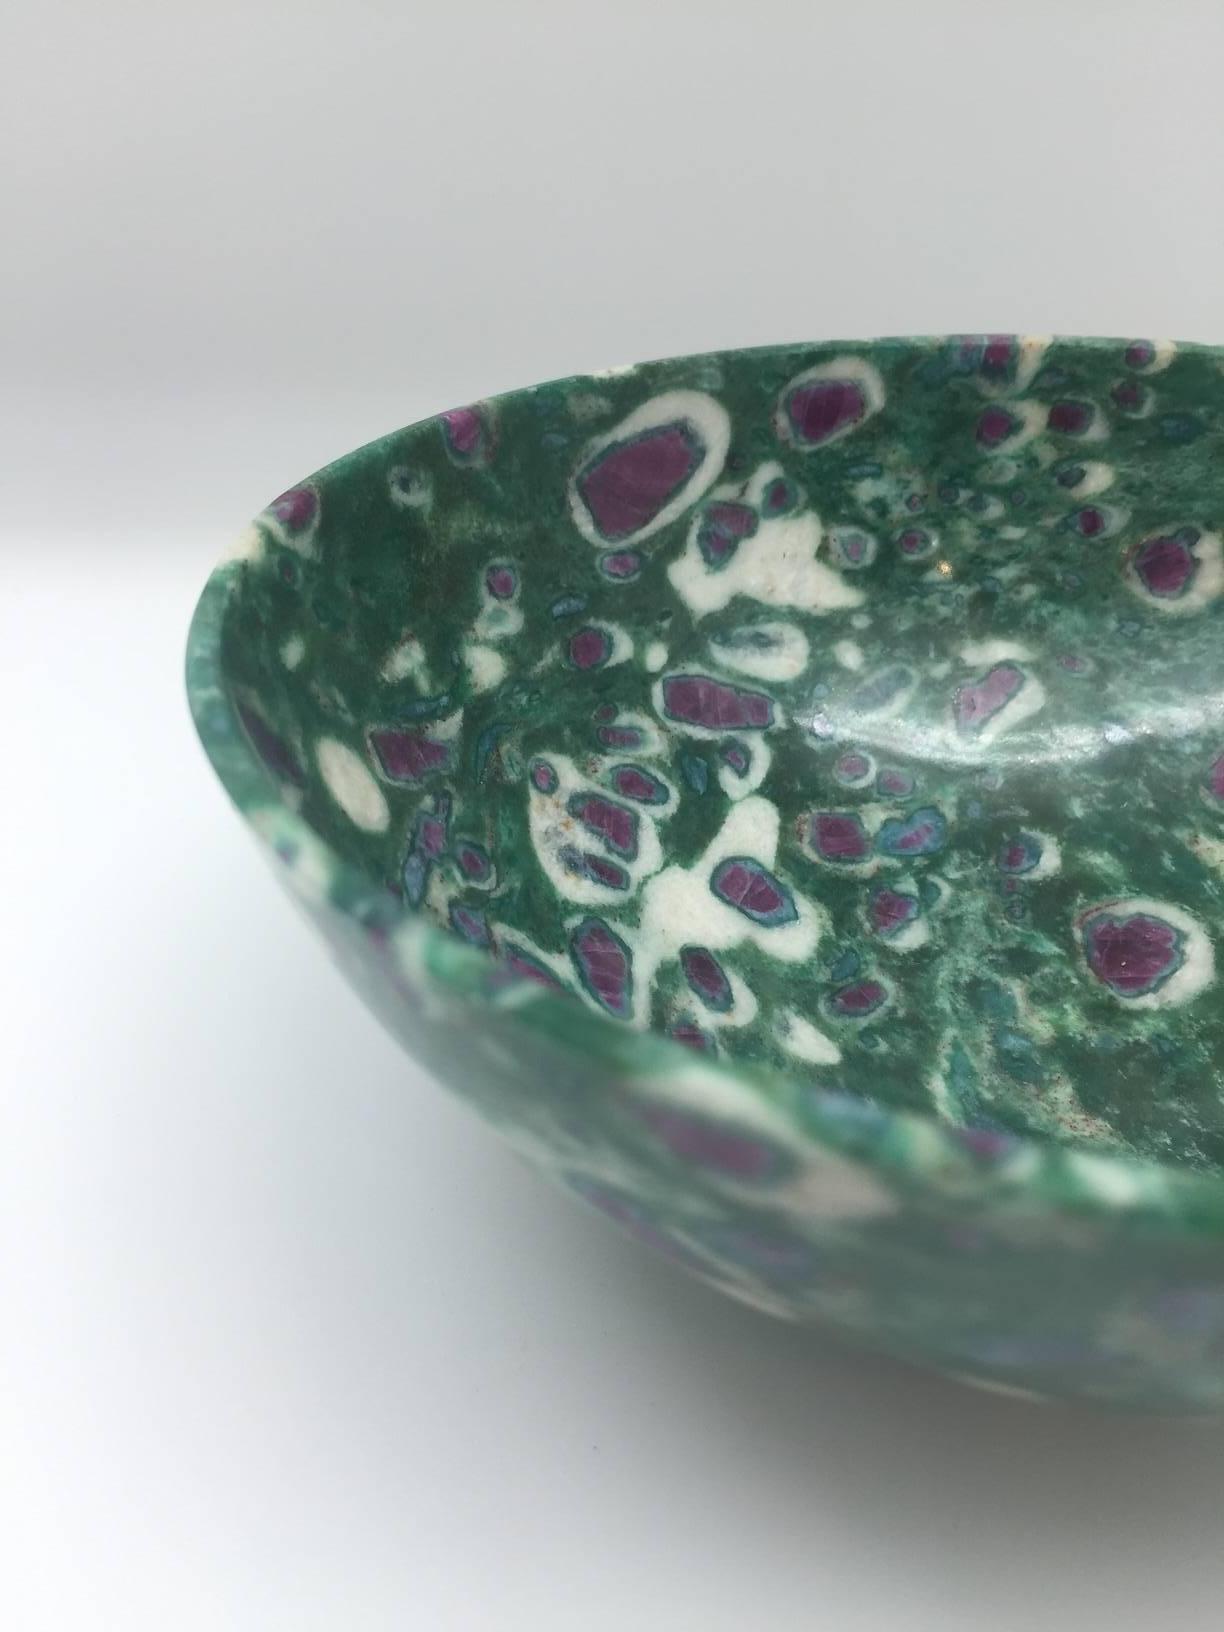 Red ruby in green fuchsite semi-precious footed stone bowl. Fuchsite is a type of muscovite mica mineral which, in this case, has a higher level of chromium responsible for the beautiful green coloring. The red inclusions are corundum crystals also